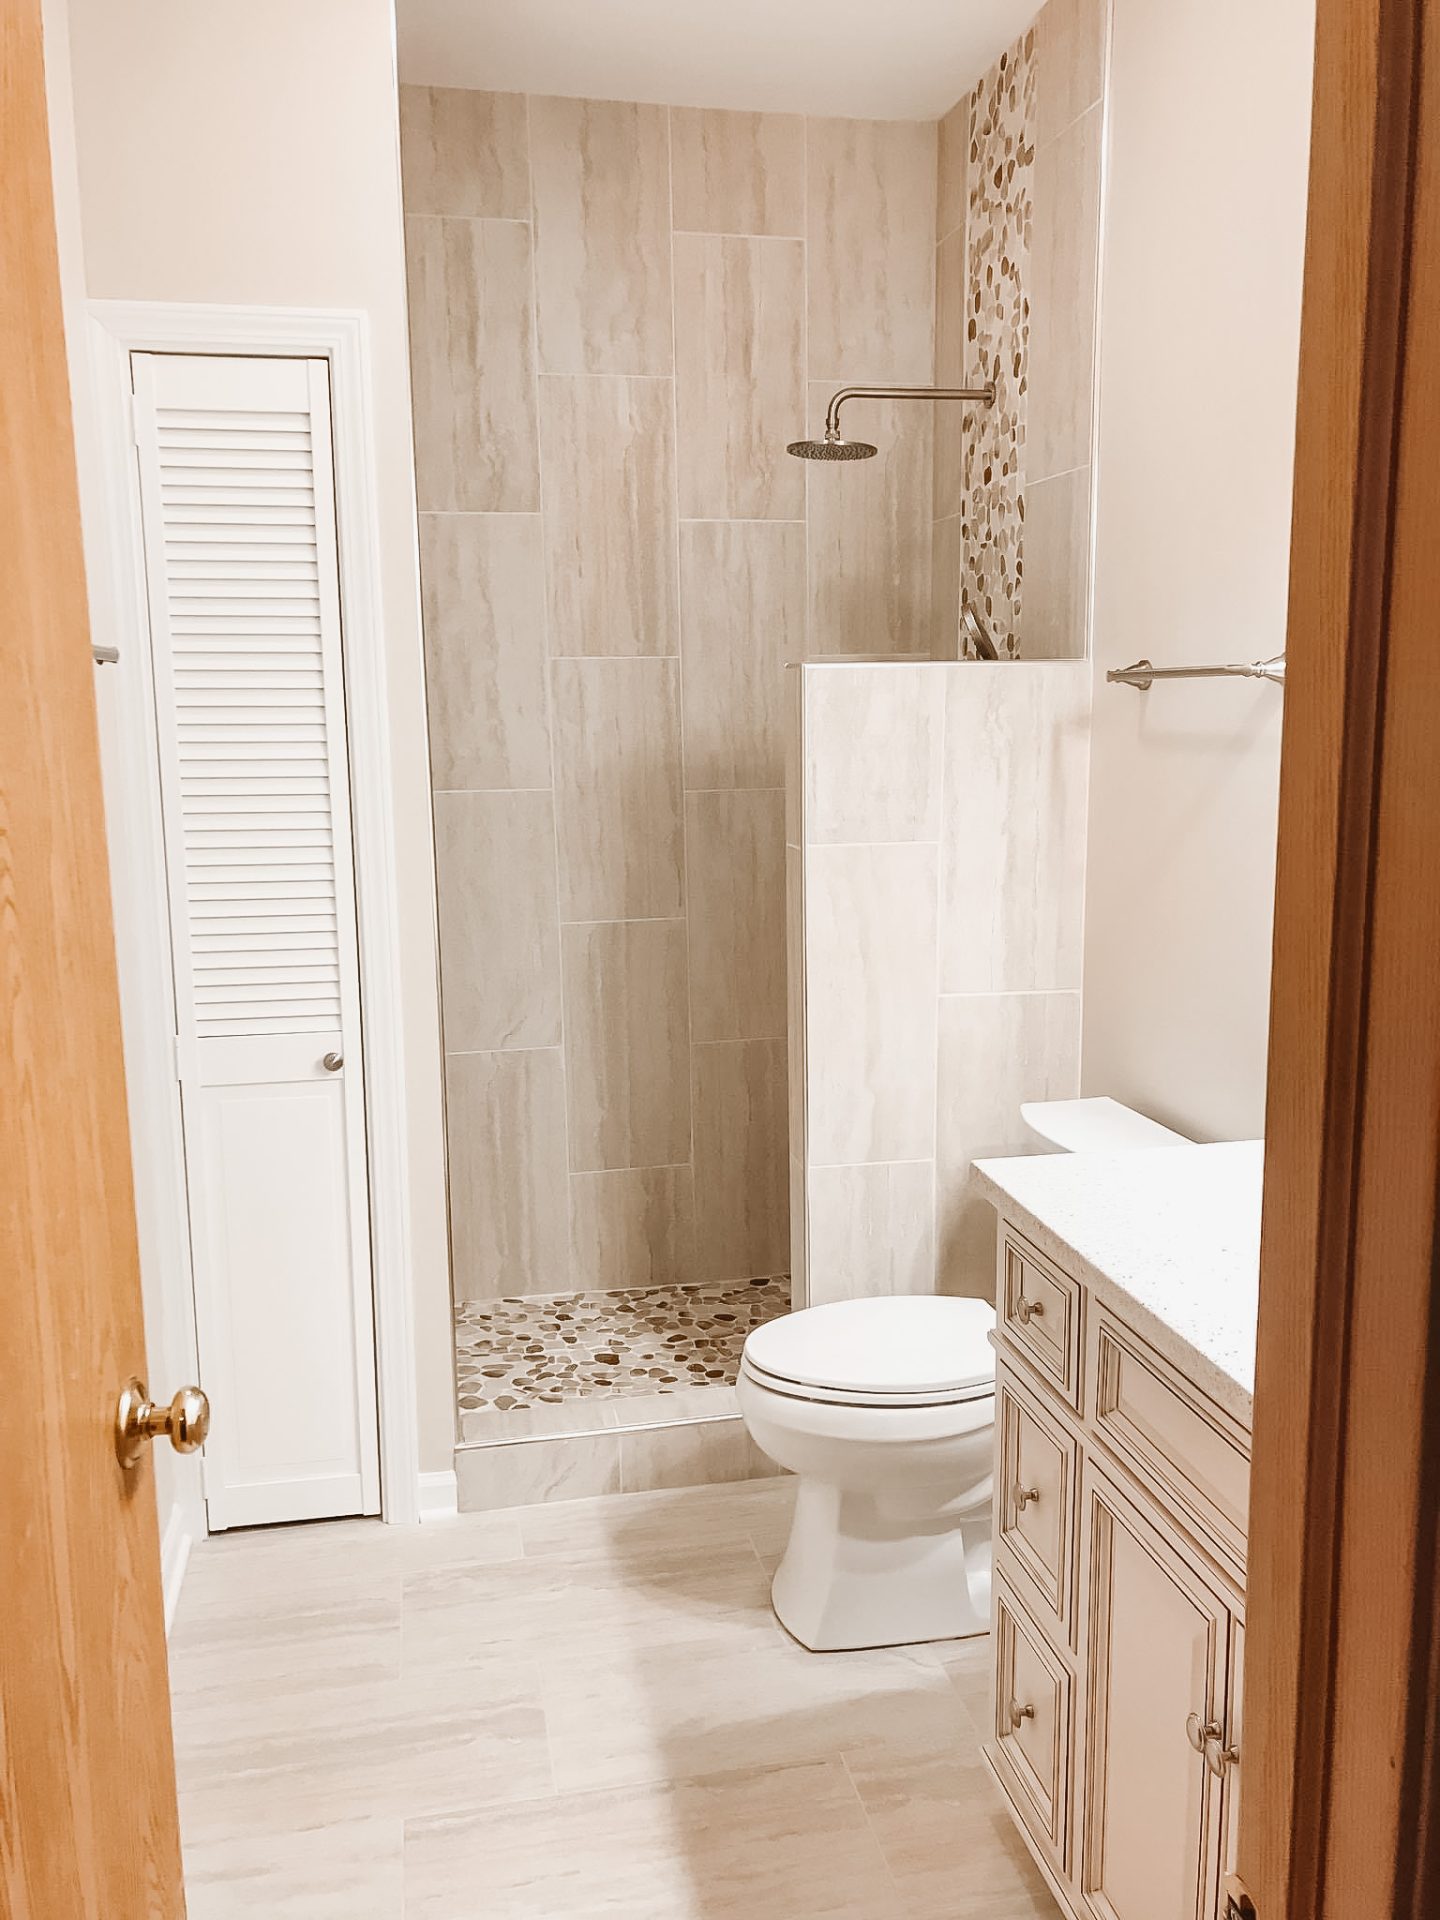 Midwest Remodel specializes in bathroom renovations.